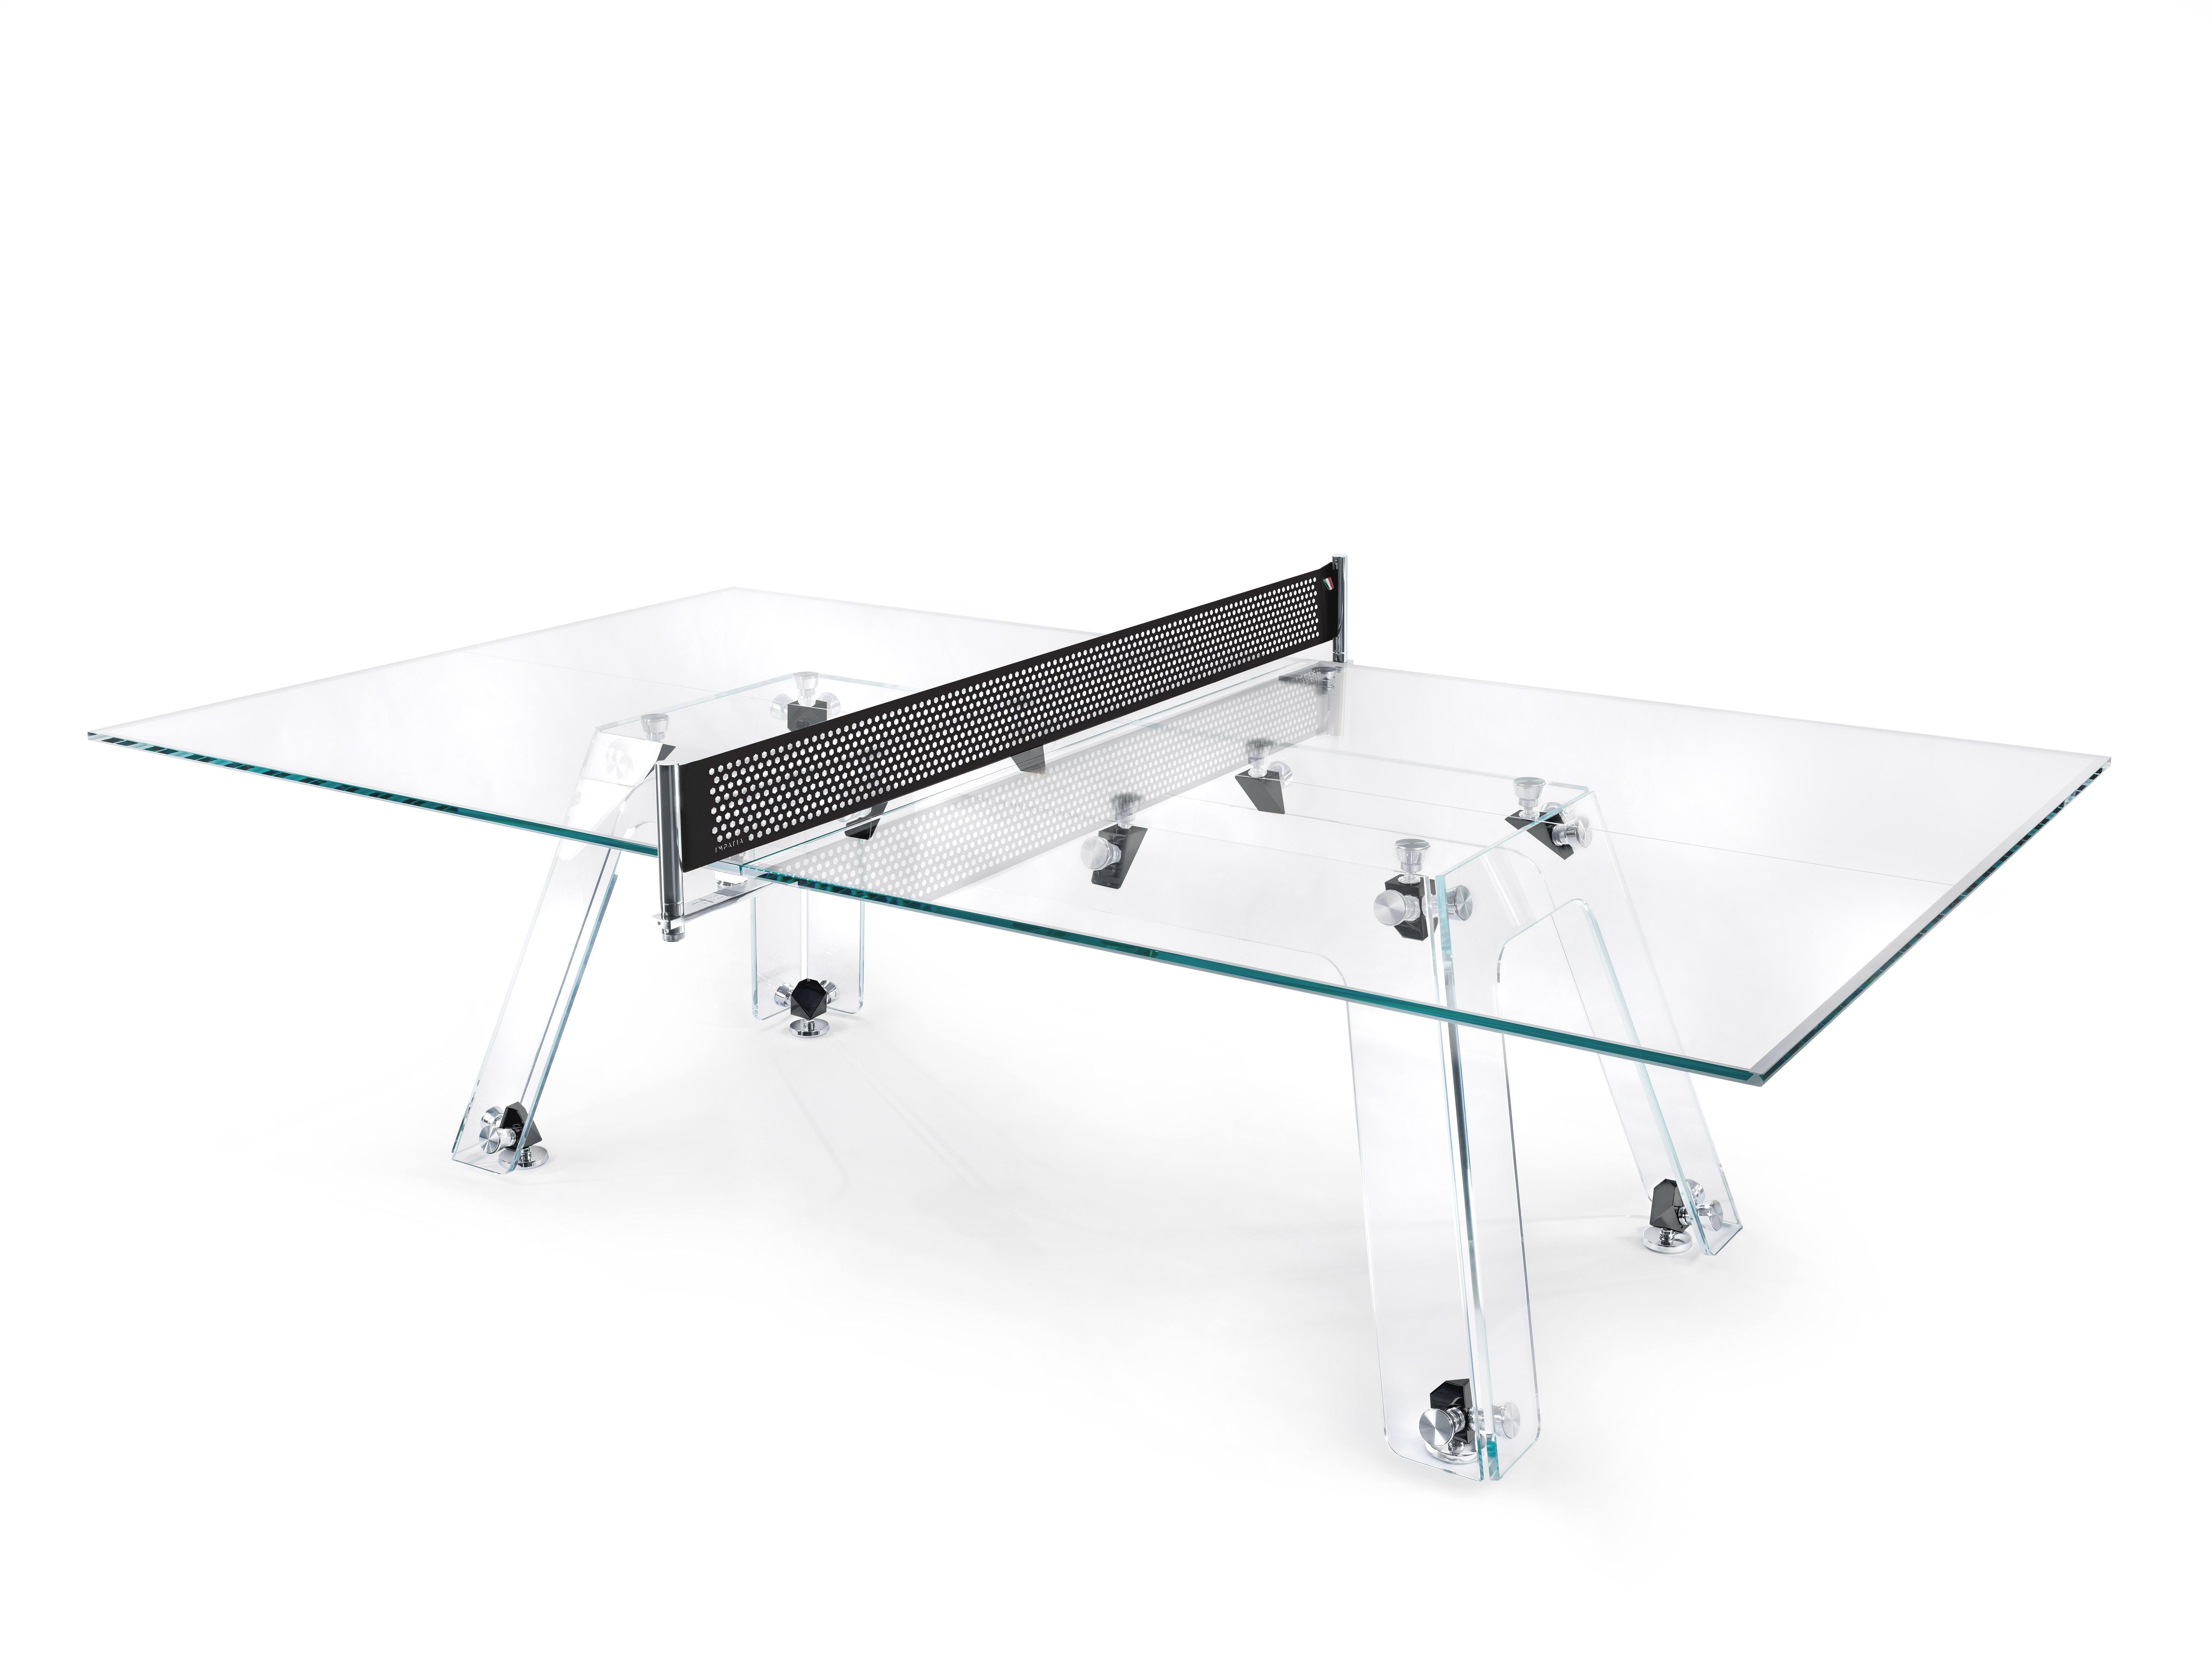 Lungolinea Classic black nickel table tennis by Impatia
Dimensions: D274 x W152.5 x H76 cm
Weight: 220 kg
Material: Low-iron glass, Polished metal components,Chrome connecting joints.
Also Available: Different Colours and Materials.

The idea